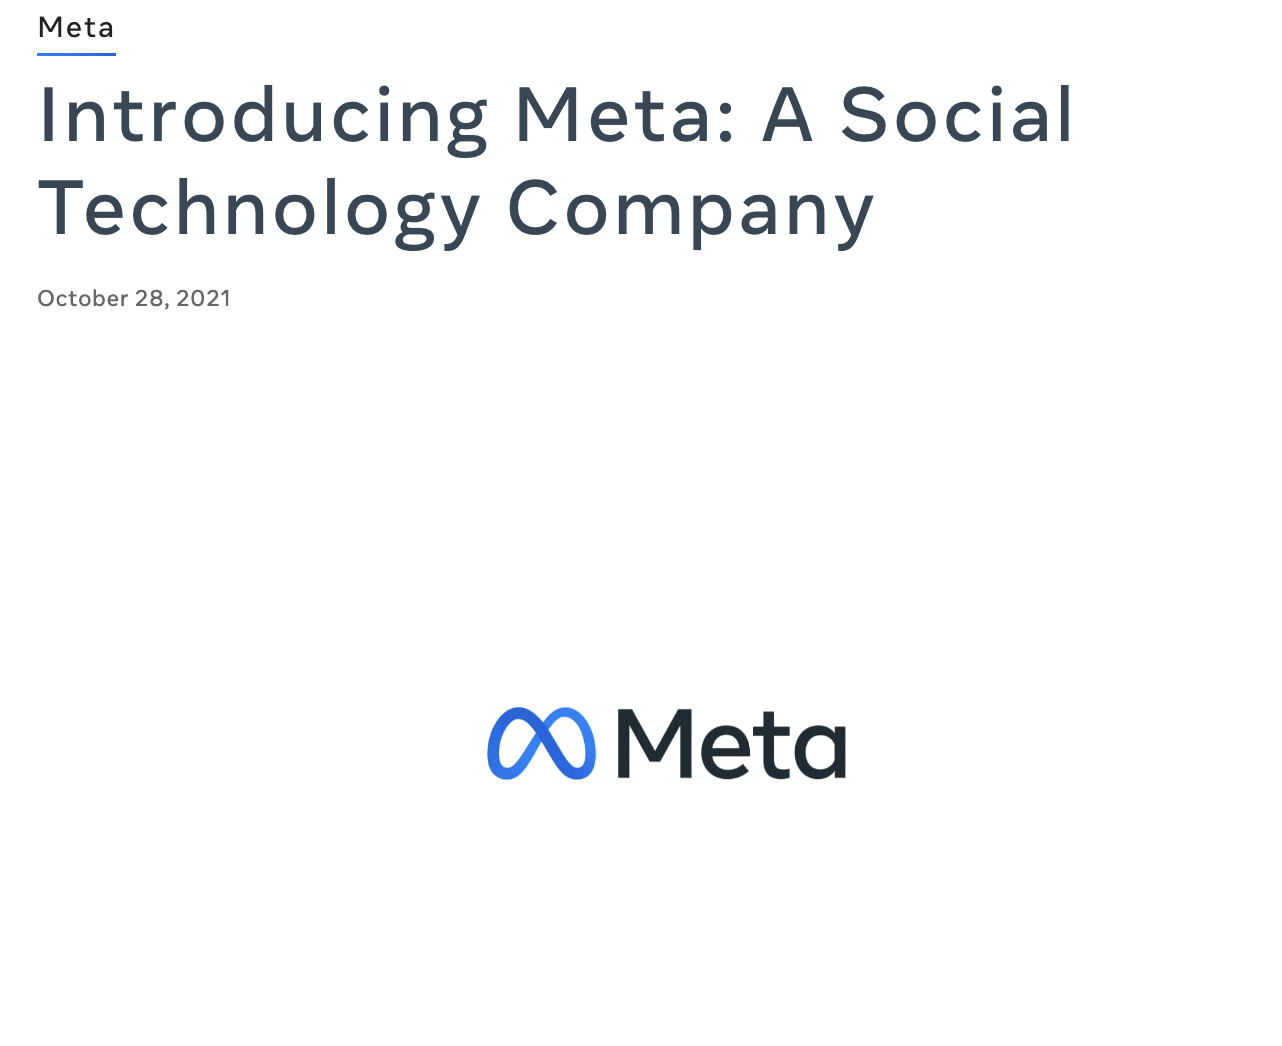 Meta is now considering itself a social technology company with the introduction of Metaverse tech